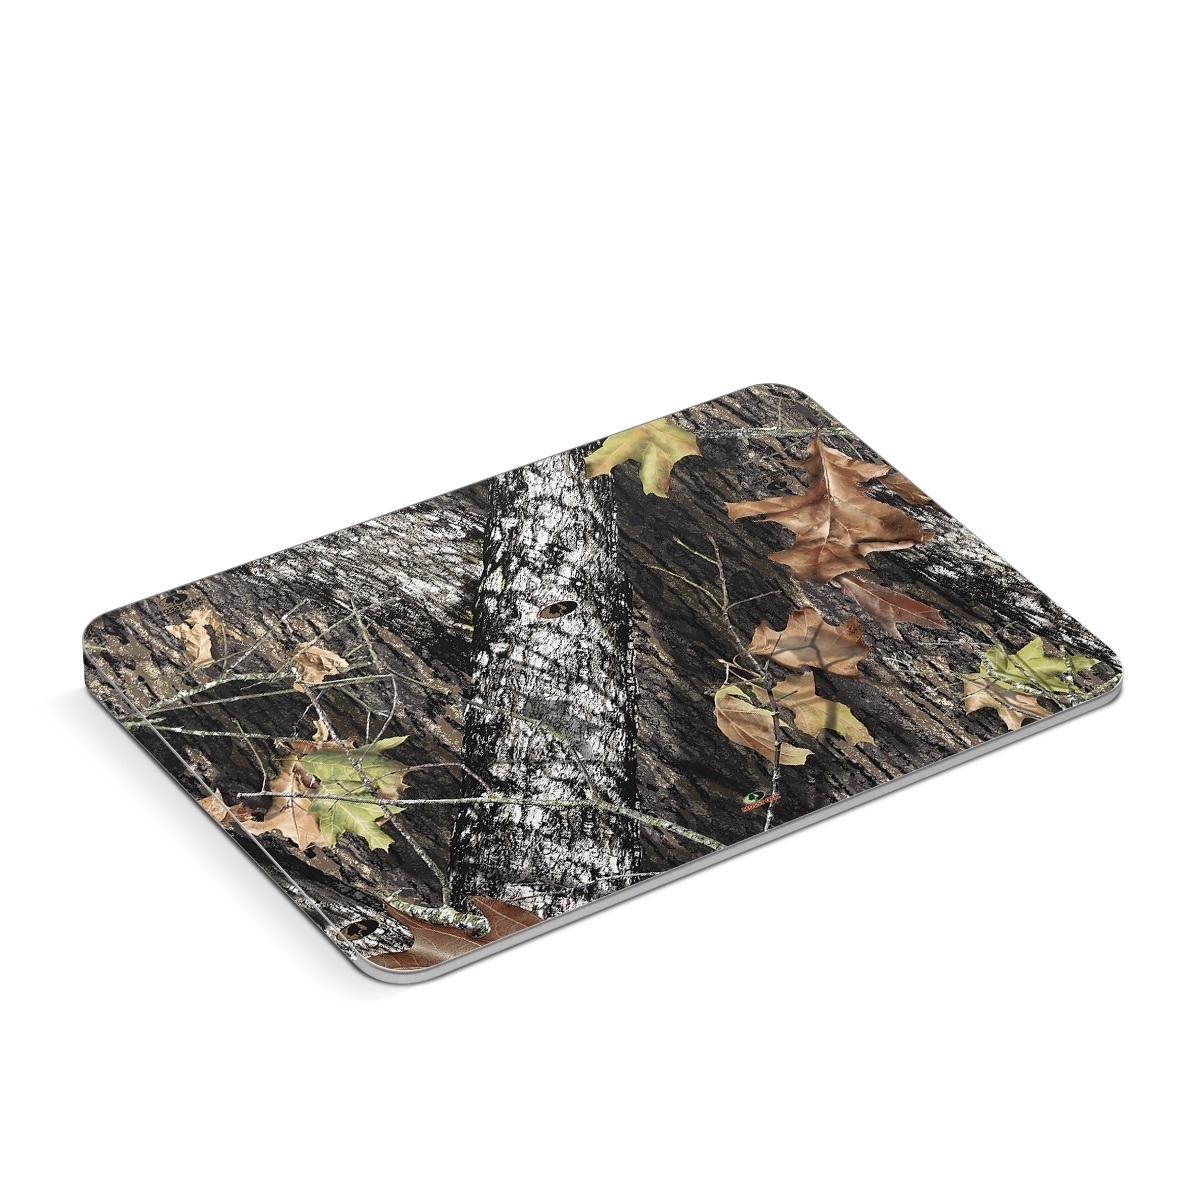 Apple Magic Trackpad Skin design of Leaf, Tree, Plant, Adaptation, Camouflage, Branch, Wildlife, Trunk, Root, with black, gray, green, red colors